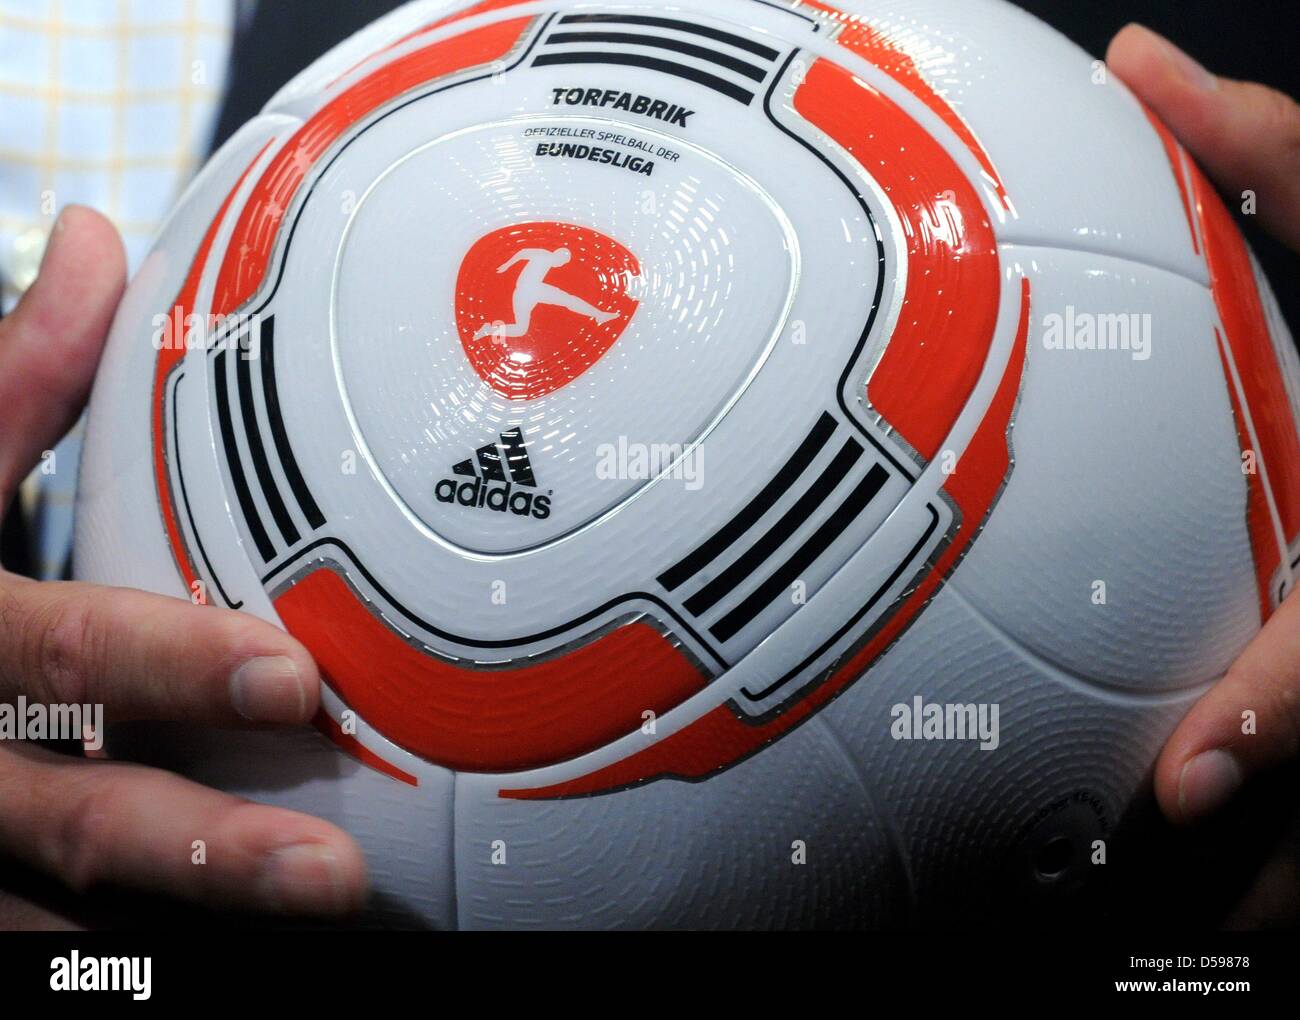 The new ball of the German Bundesliga is shown during a press conference of the German team in Velmore Grand Hotel in Erasmia near Pretoria, 15 June 2010. The ball is named "Torfabrik". Photo: Marcus Brandt dpa  +++(c) dpa - Bildfunk+++ Stock Photo